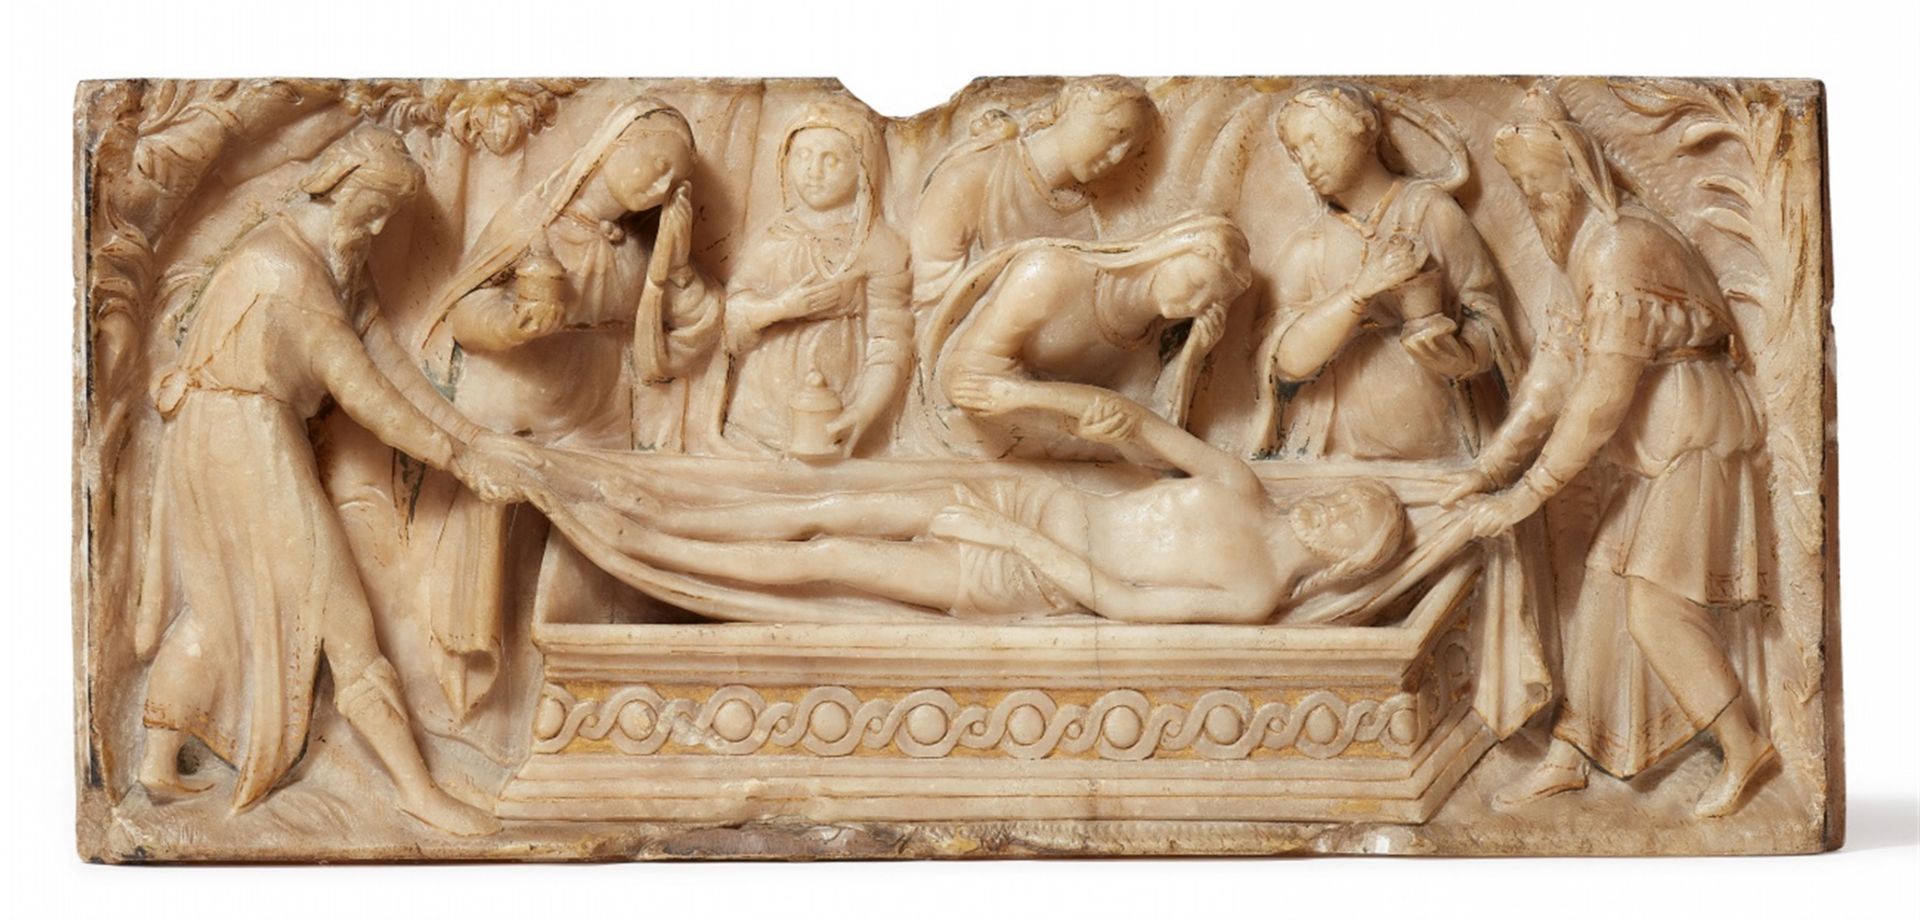 A Flemish alabaster relief of the Entombment, mid 16th century